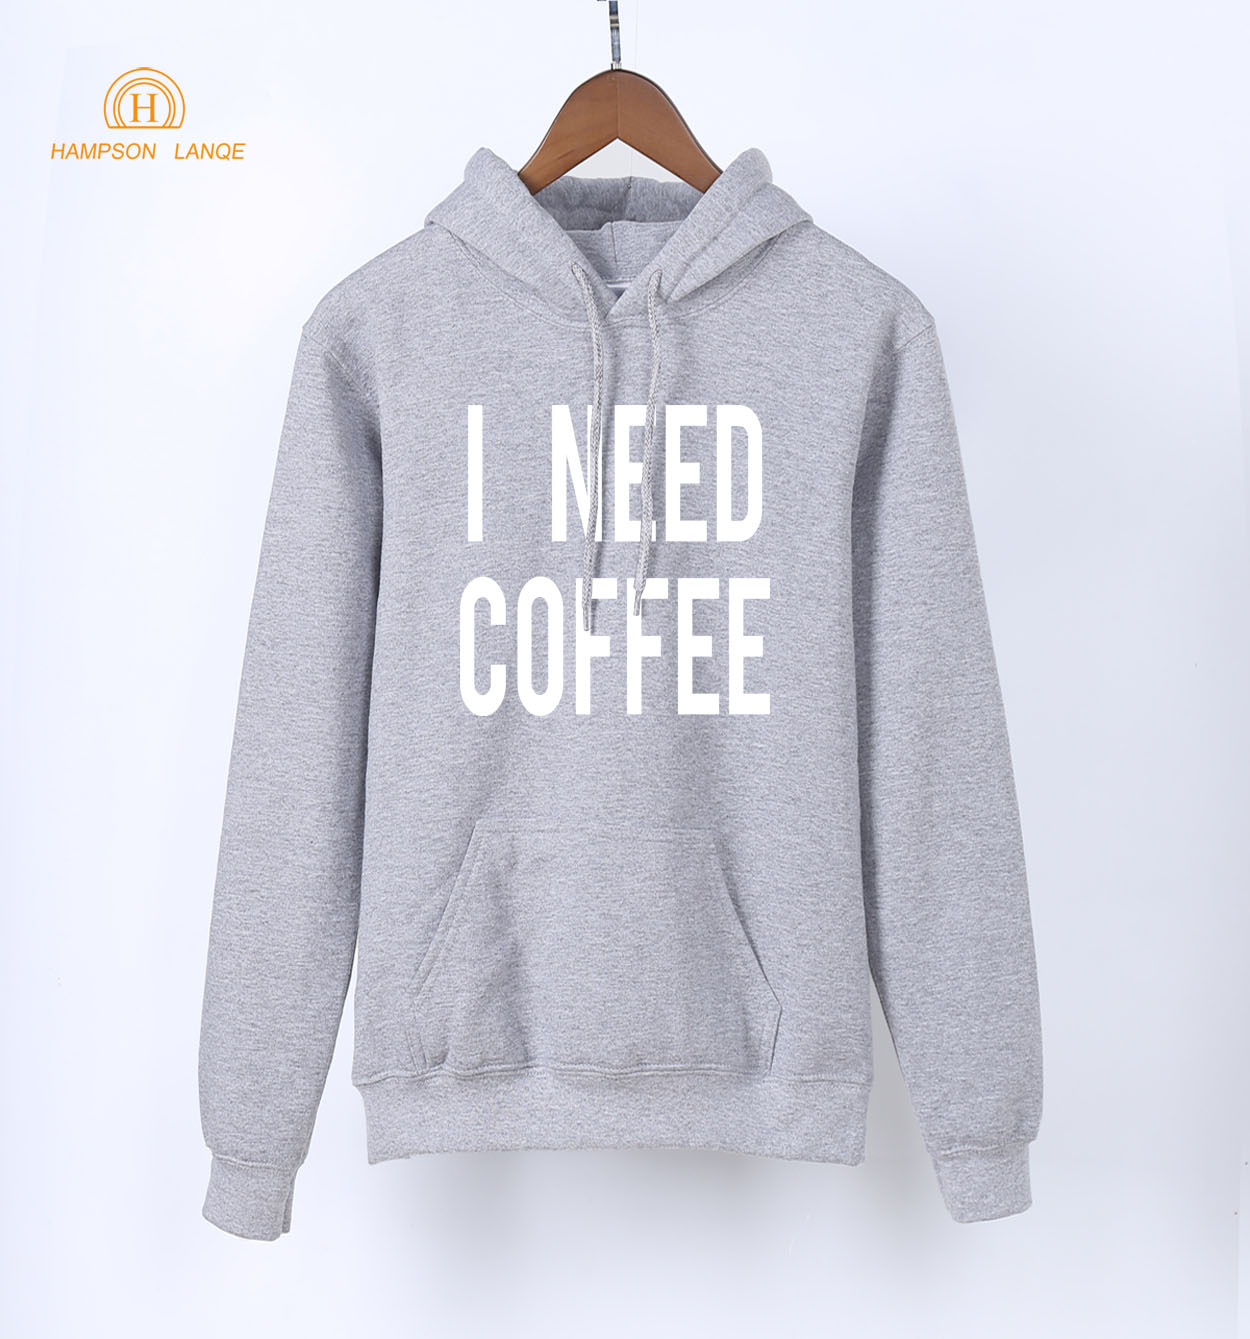 I Need Coffee Funny Adult Hoodies 2019 New Style Spring Autumn Women's ...